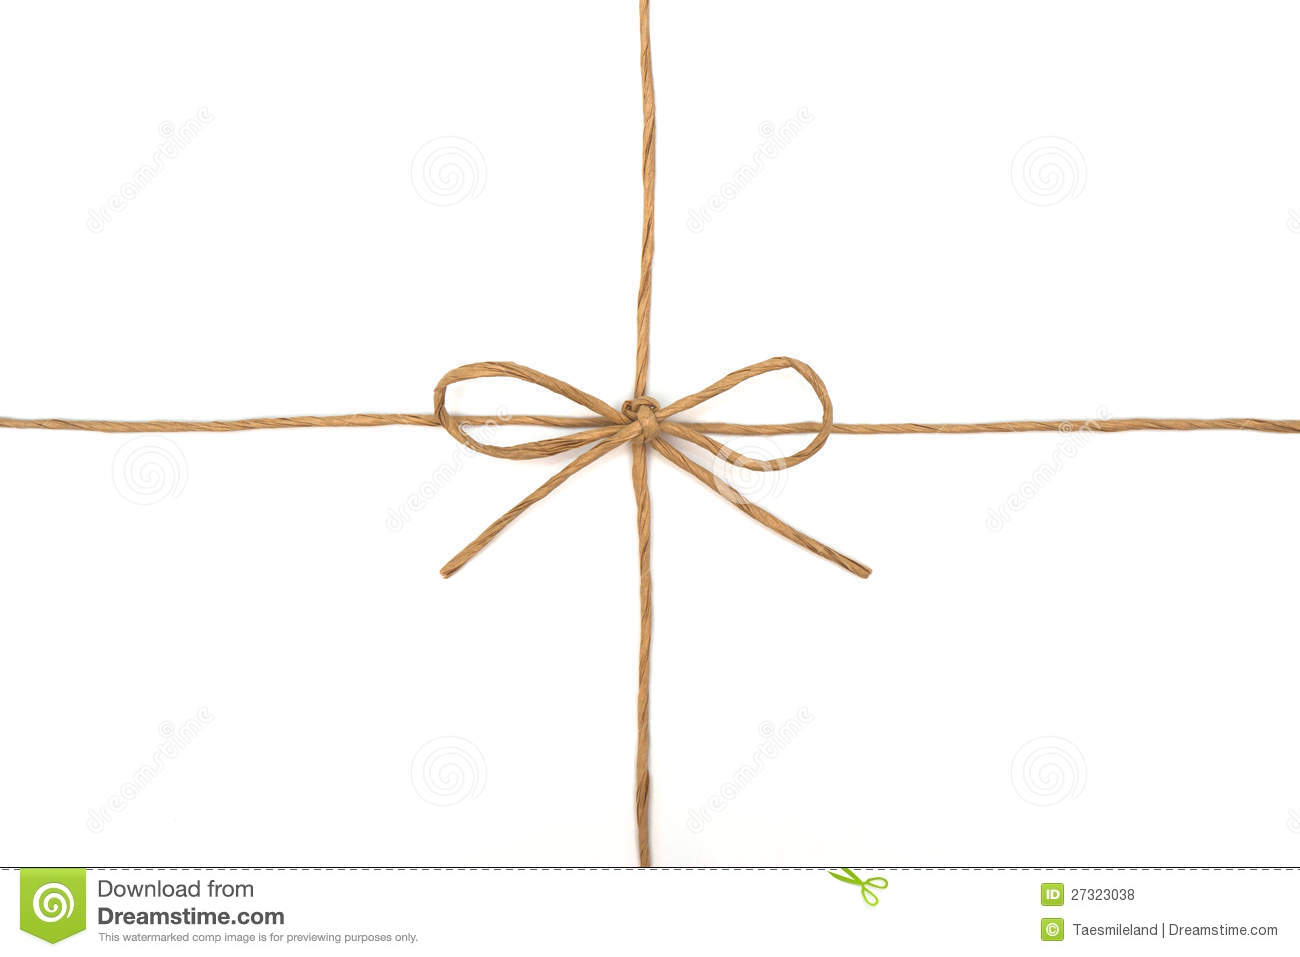 String Tied In A Bow On White Royalty Free Stock Photos   Image    